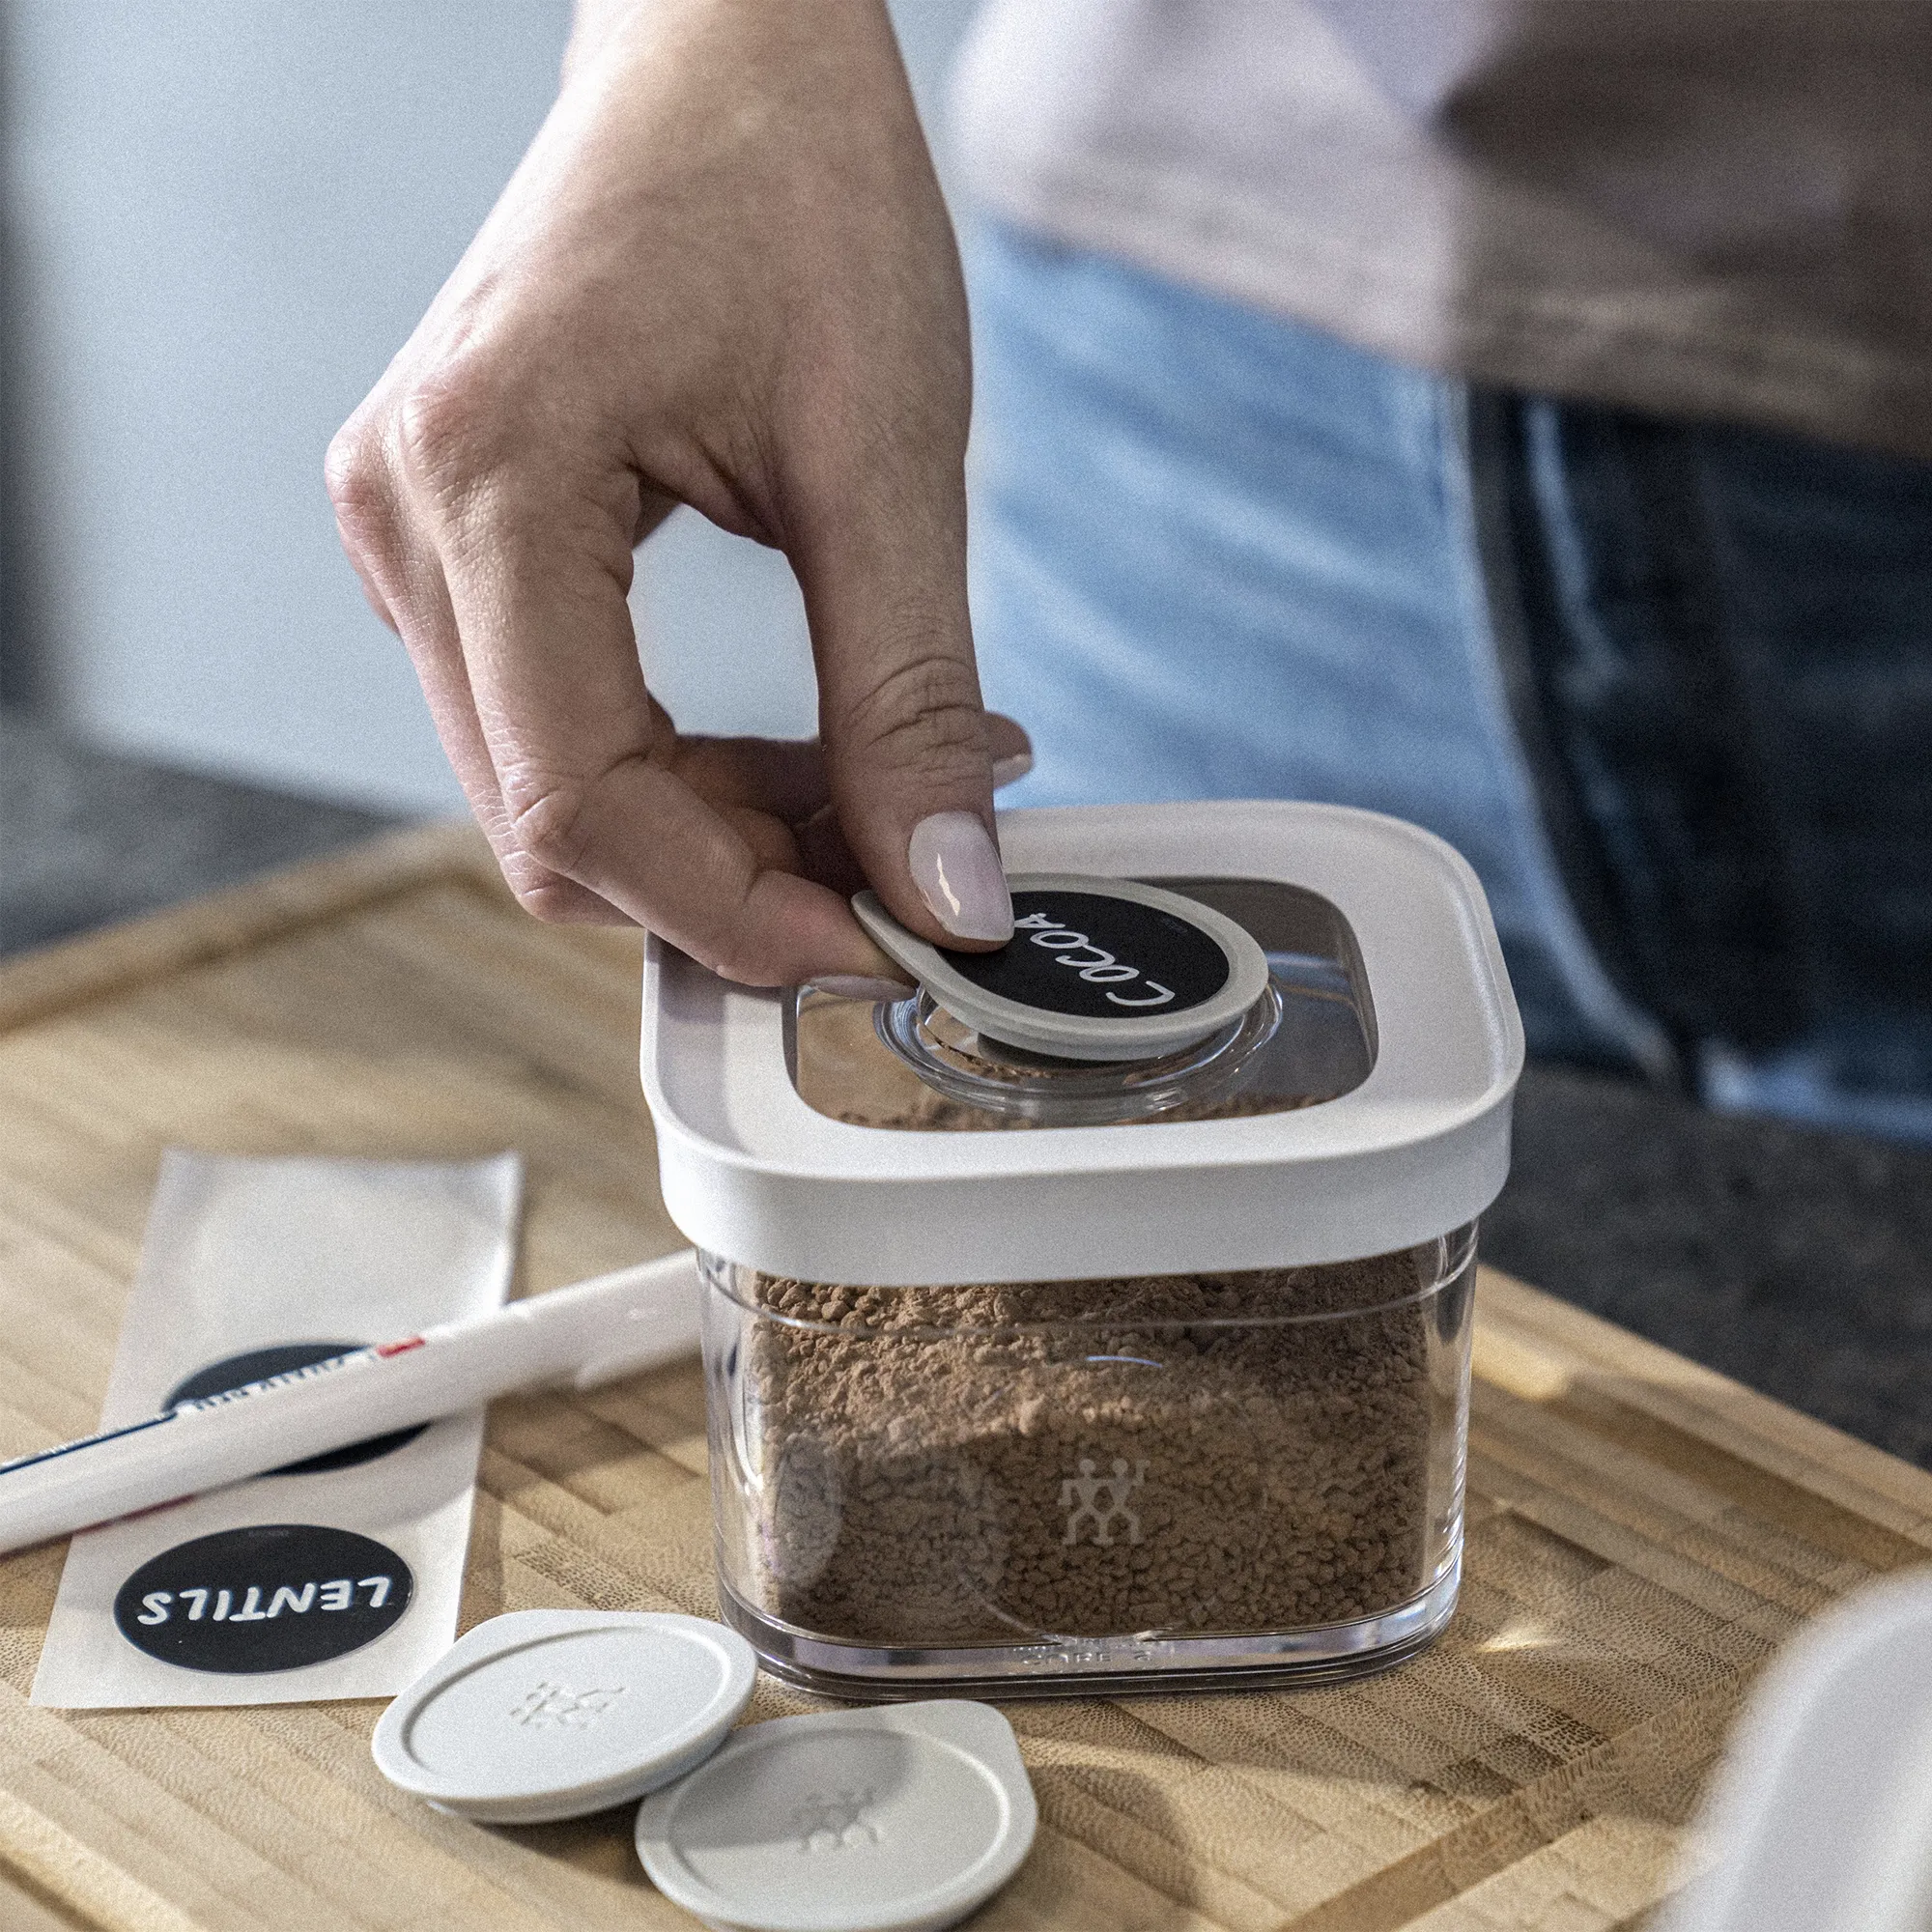 https://www.homethreads.com/files/zwilling/1025079-zwilling-fresh-save-cube-box-plasic-airtight-dry-food-storage-container-small-cube-6.webp